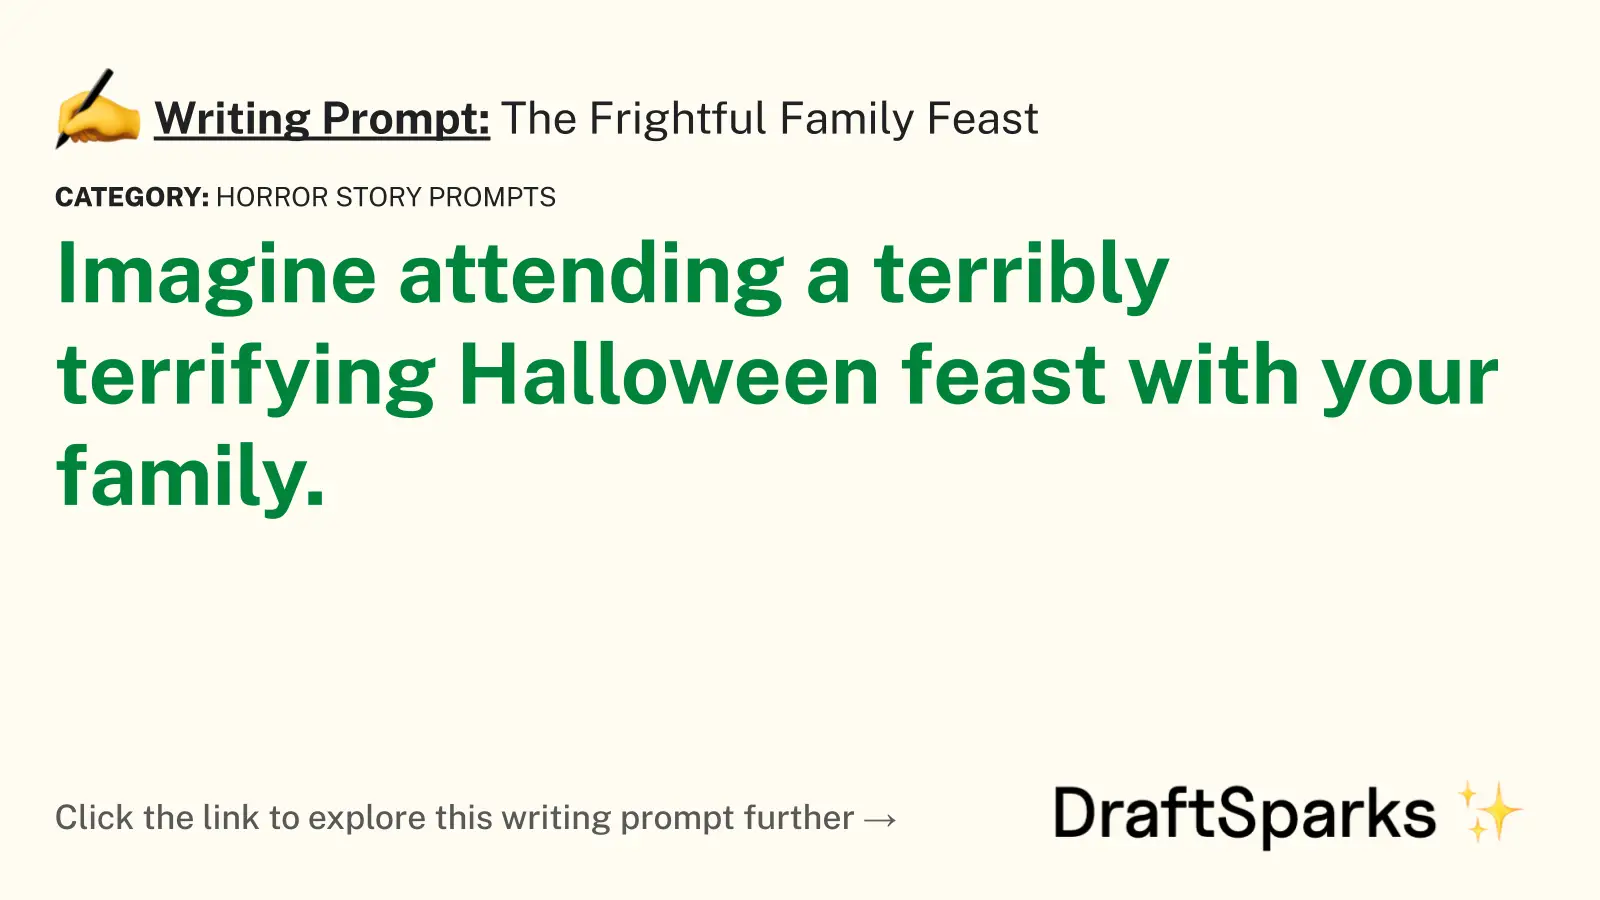 The Frightful Family Feast